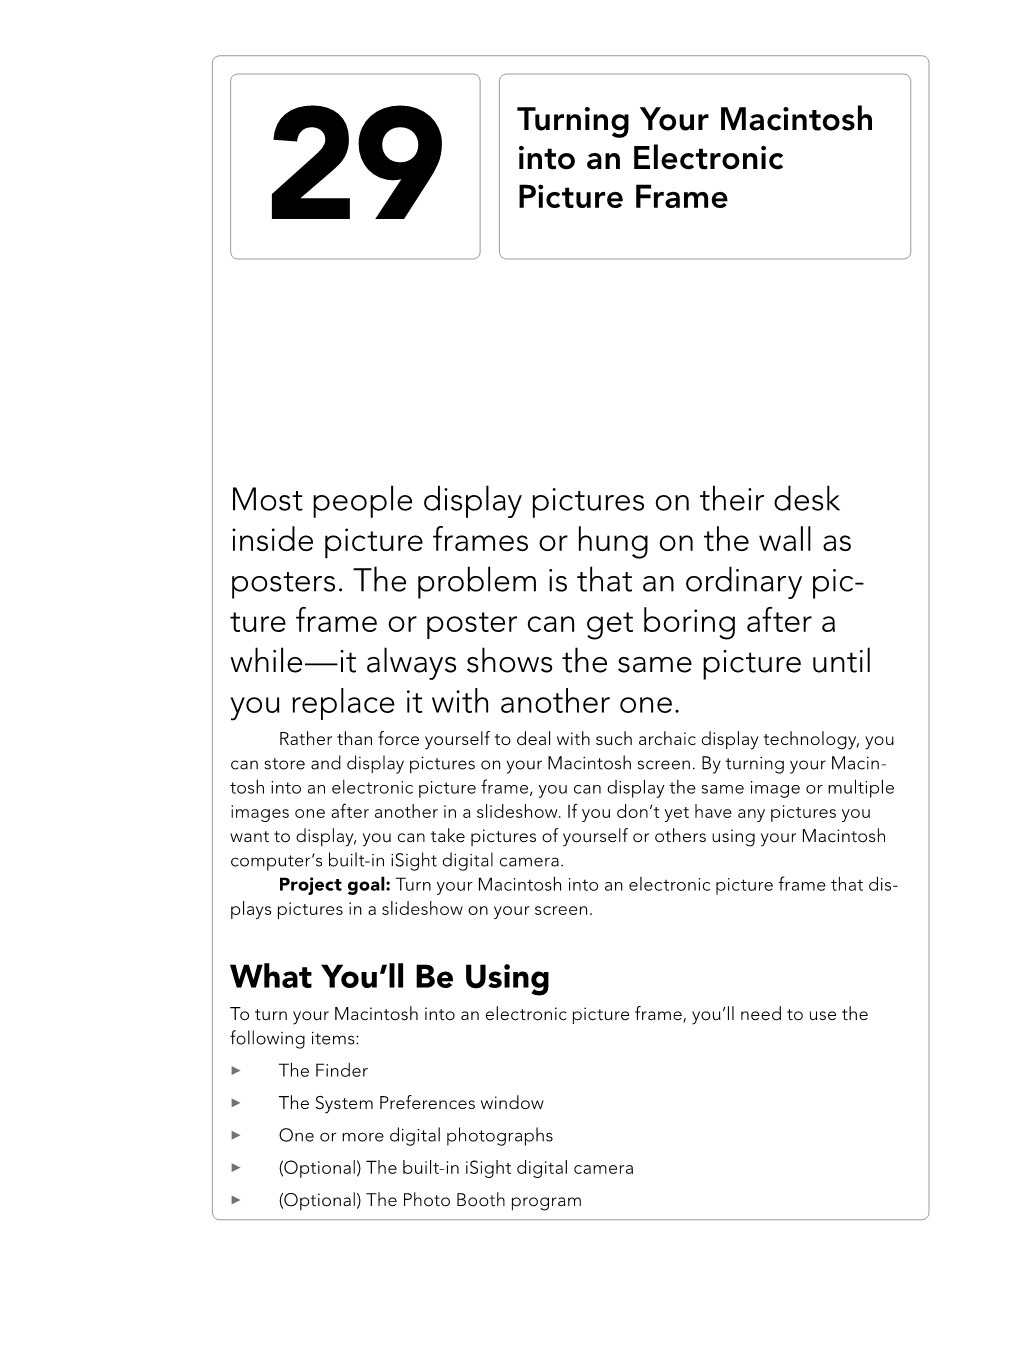 Most People Display Pictures on Their Desk Inside Picture Frames Or Hung on the Wall As Posters